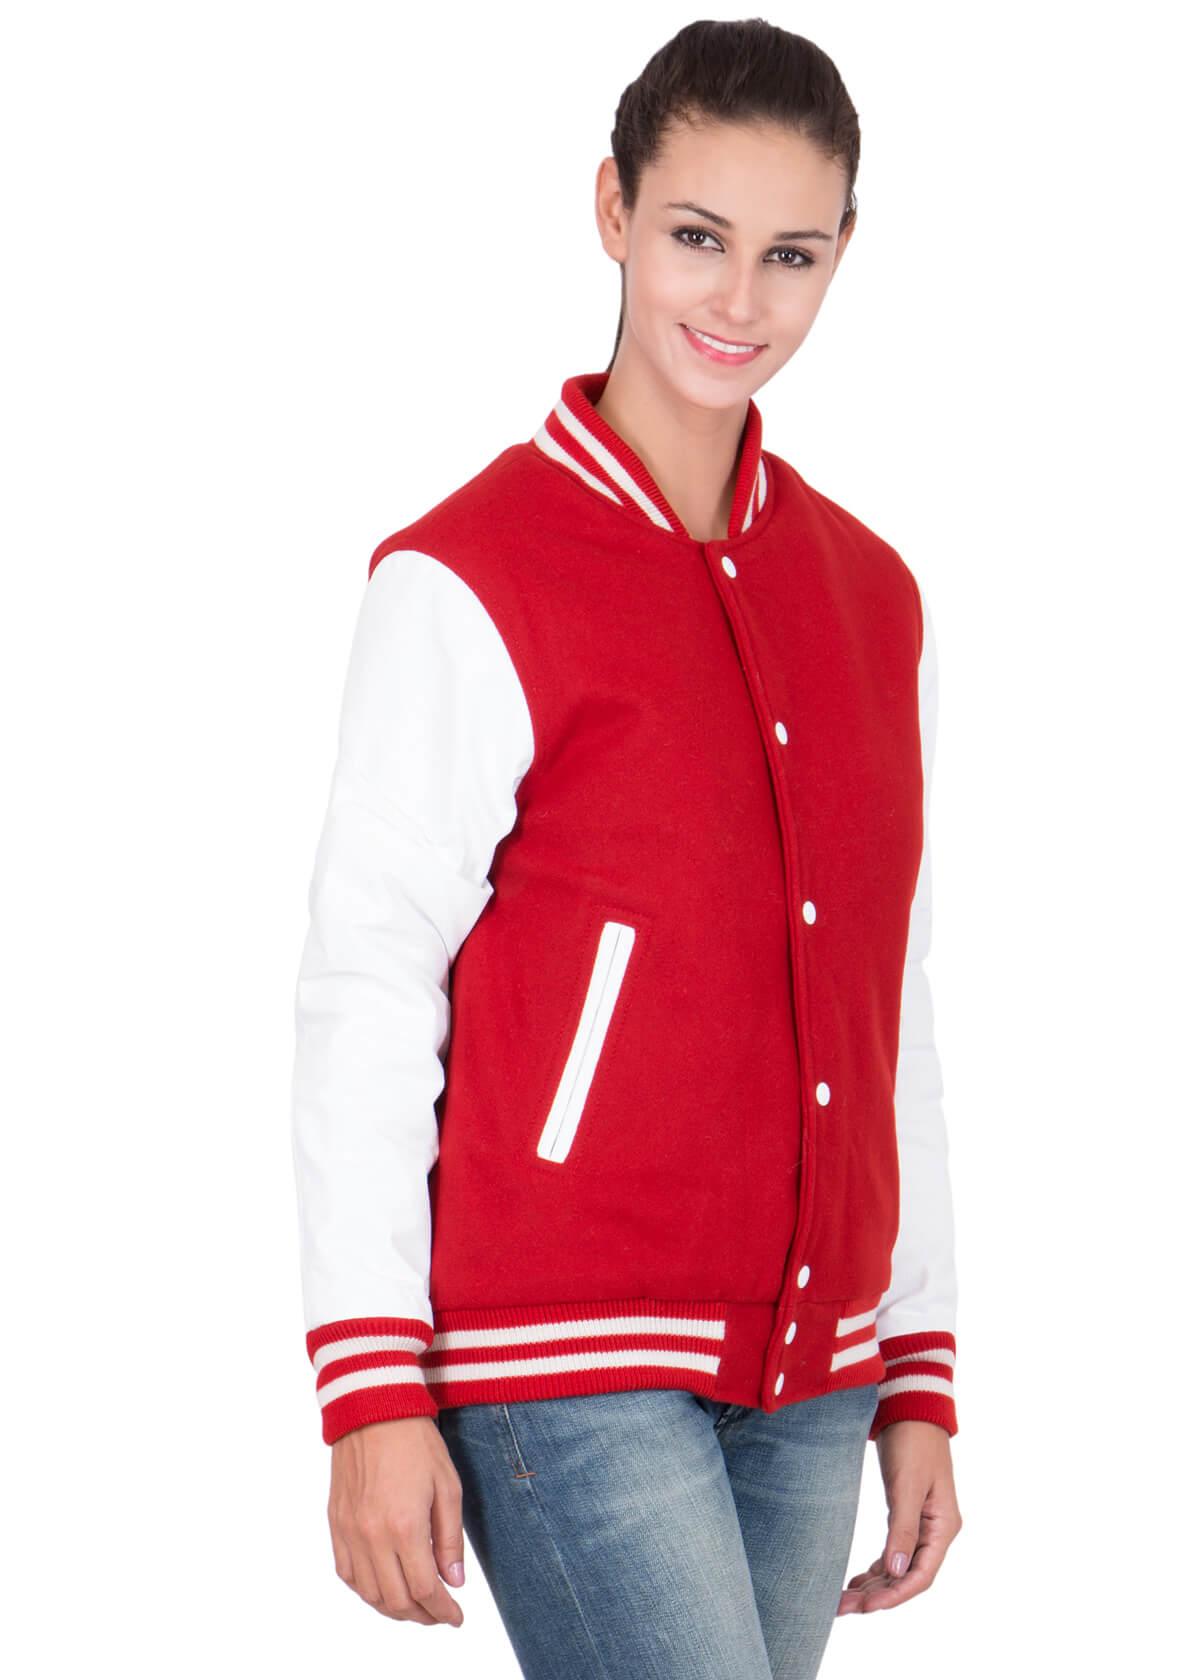 Womens Scarlet Red Varsity Jacket with White Leather Sleeves-5